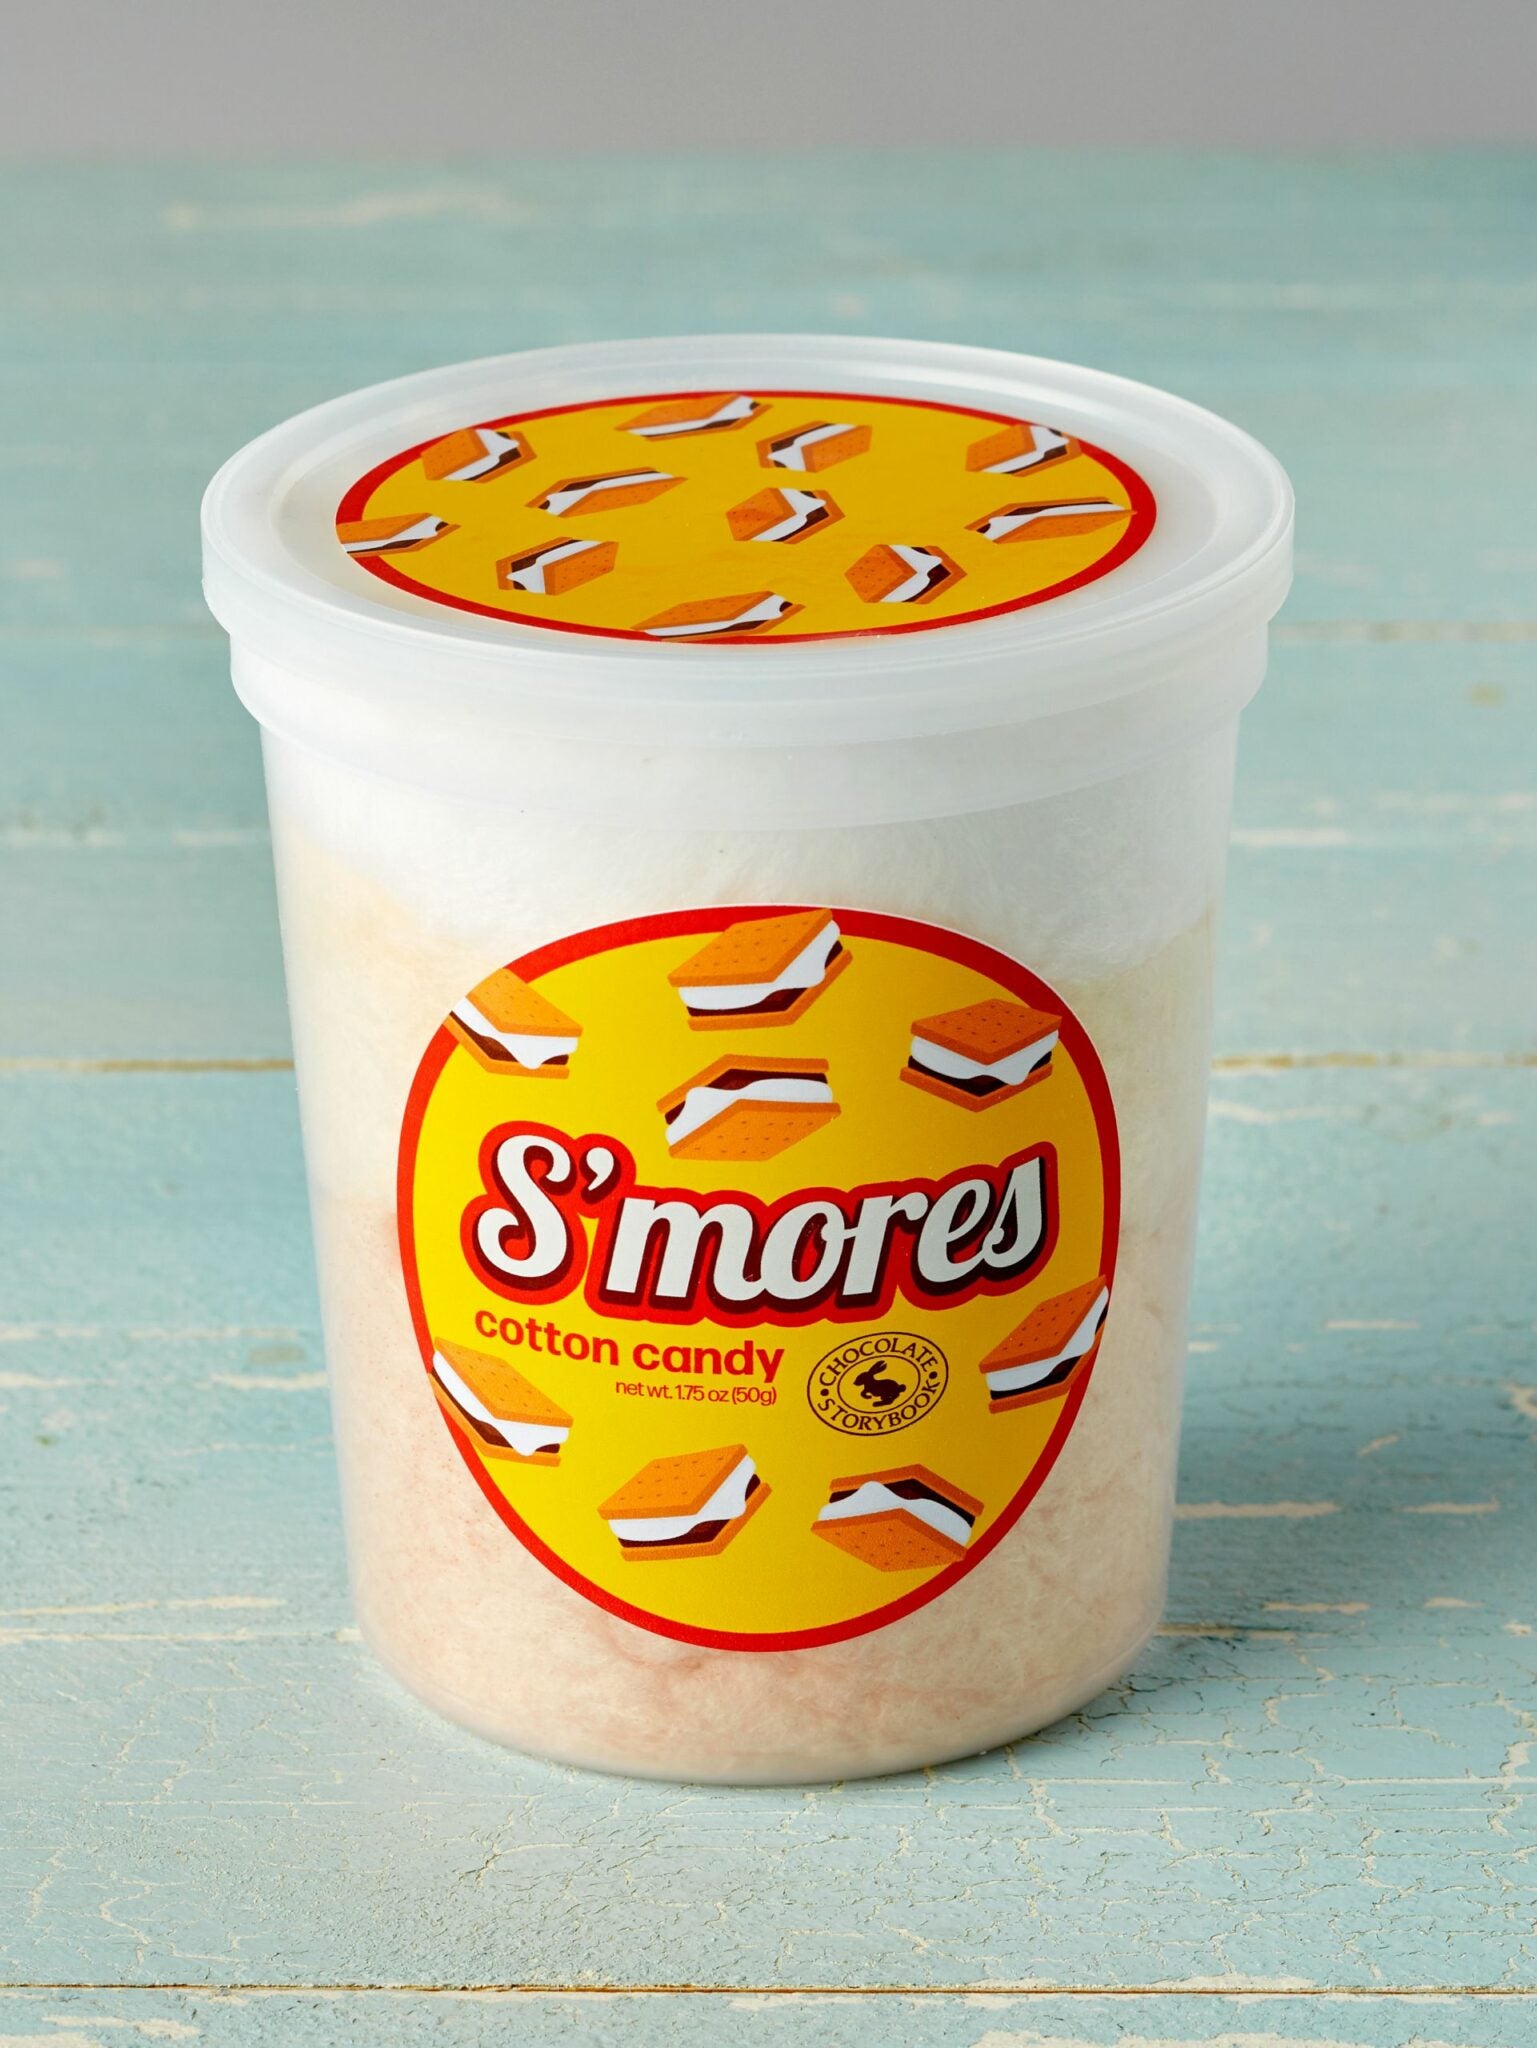 S’mores - Cotton Candy